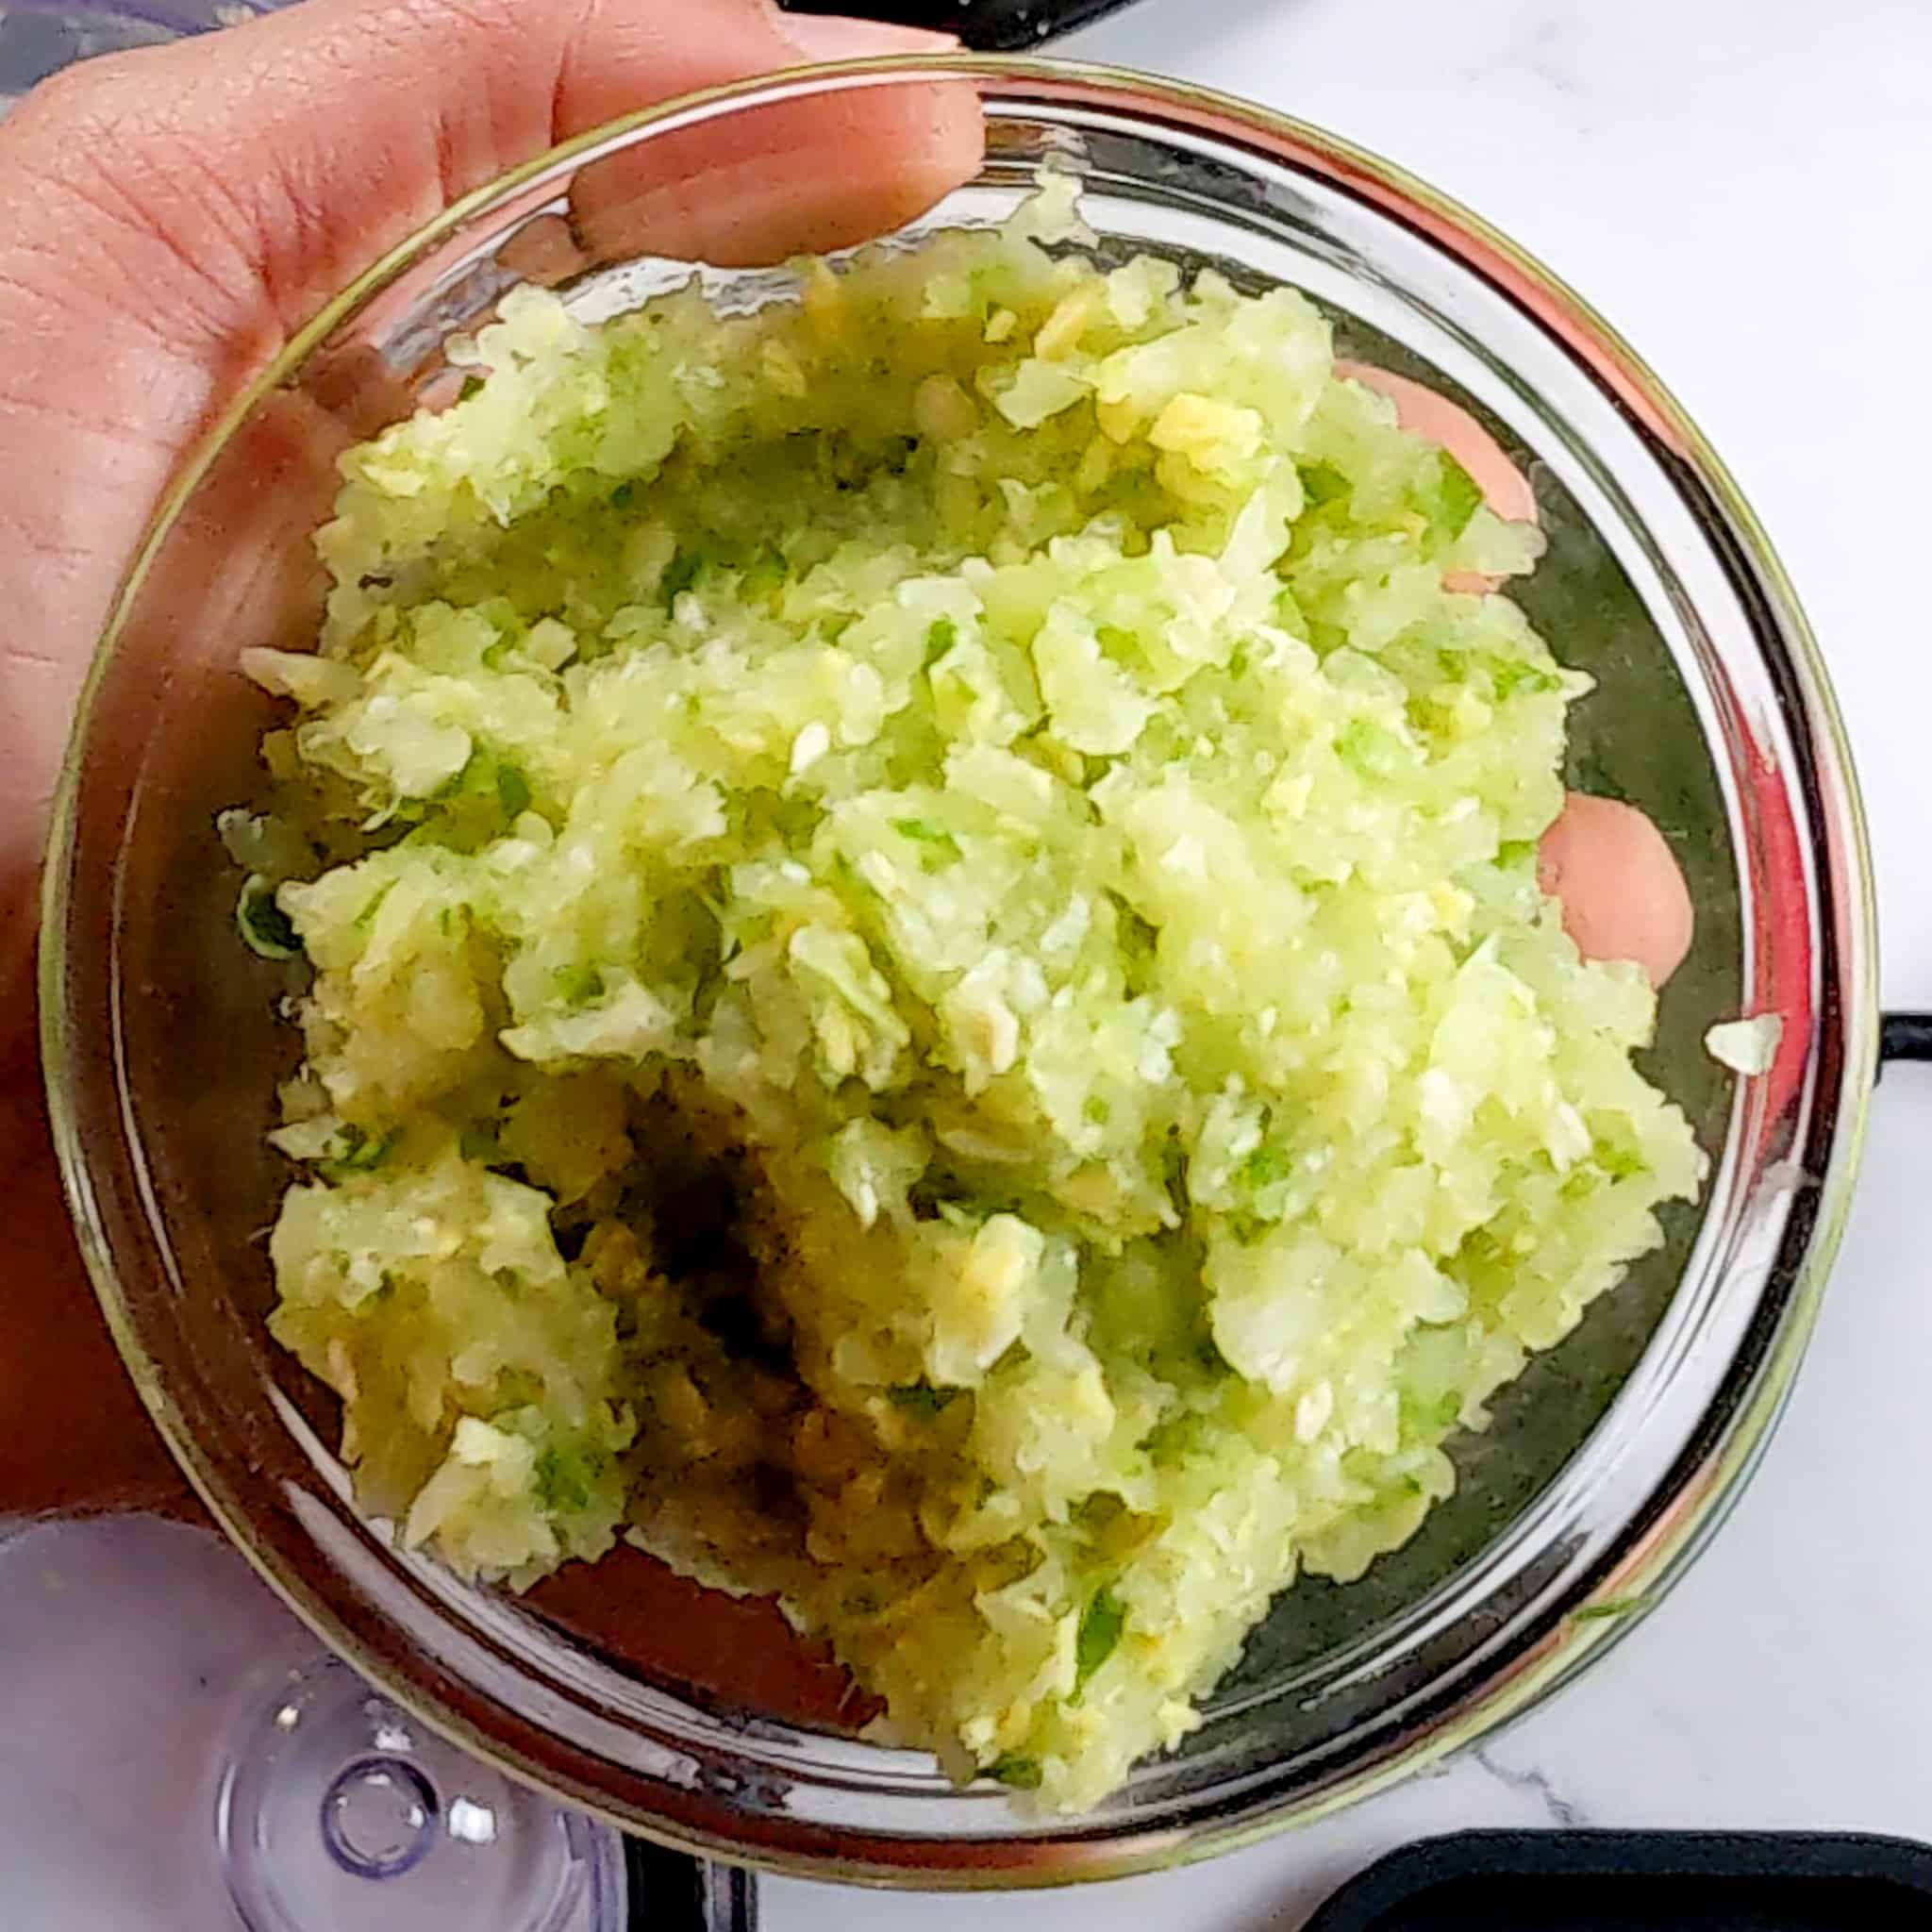 aromatic paste with garlic, ginger, onion and jalapeno in a glass bowl held in a hand